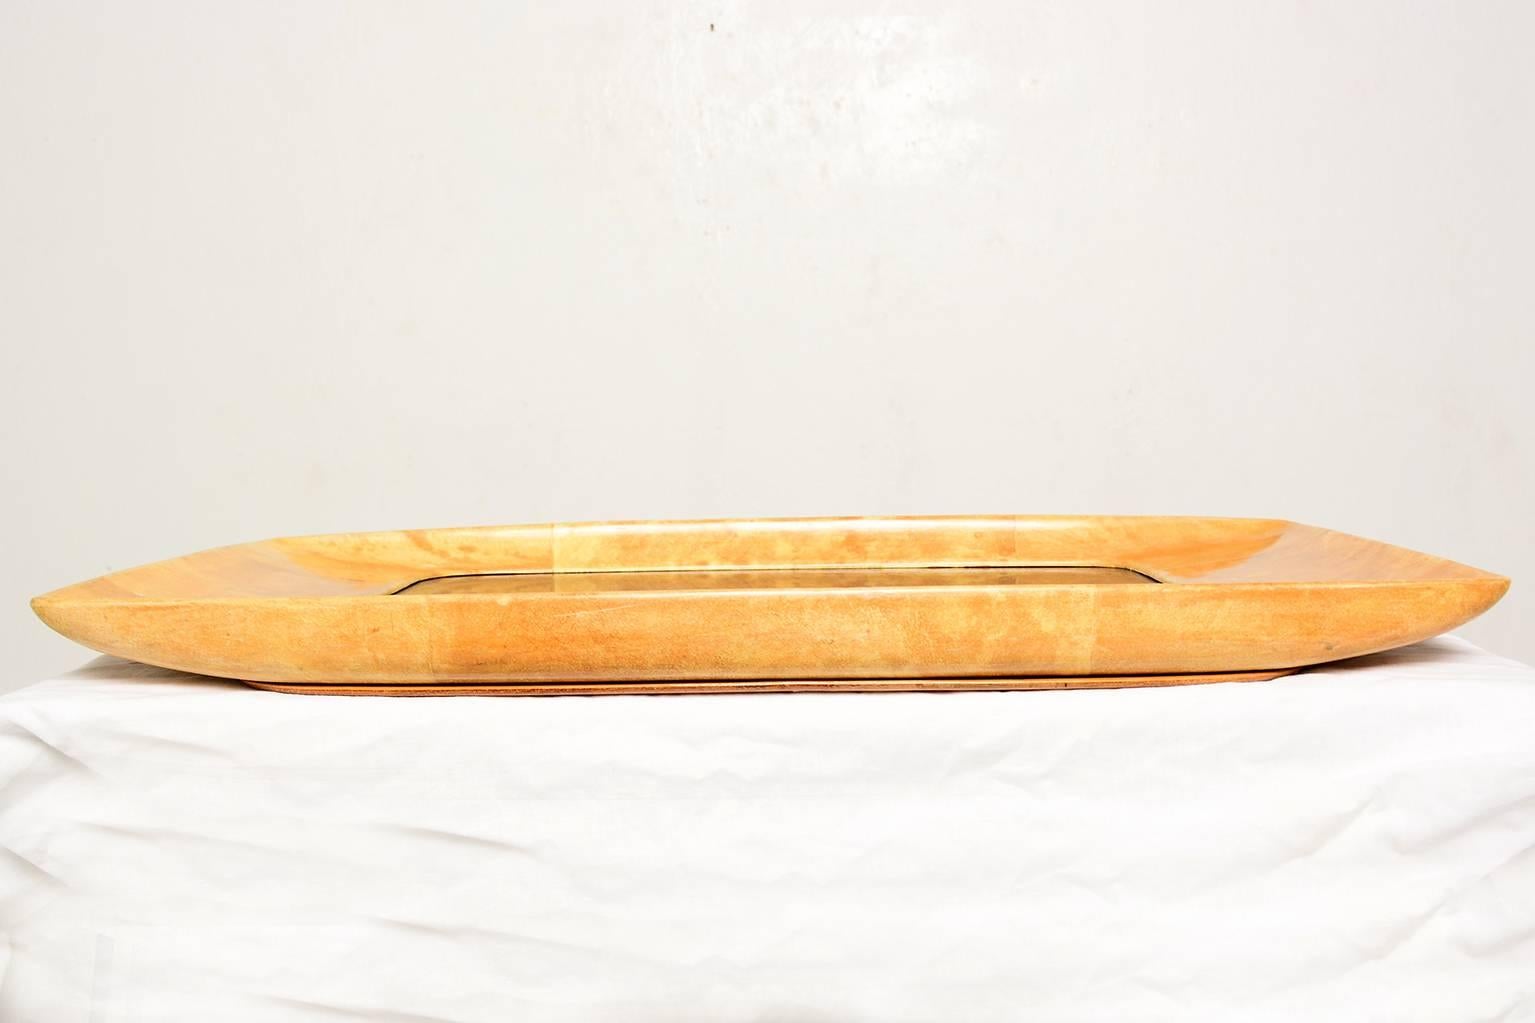 For your consideration a service tray by Aldo Tura. Large size with black glass in the centre. Sculptural shape with goatskin in natural color.
circa 1960s.
Bottom has a wood cover.
No marking from the maker present.